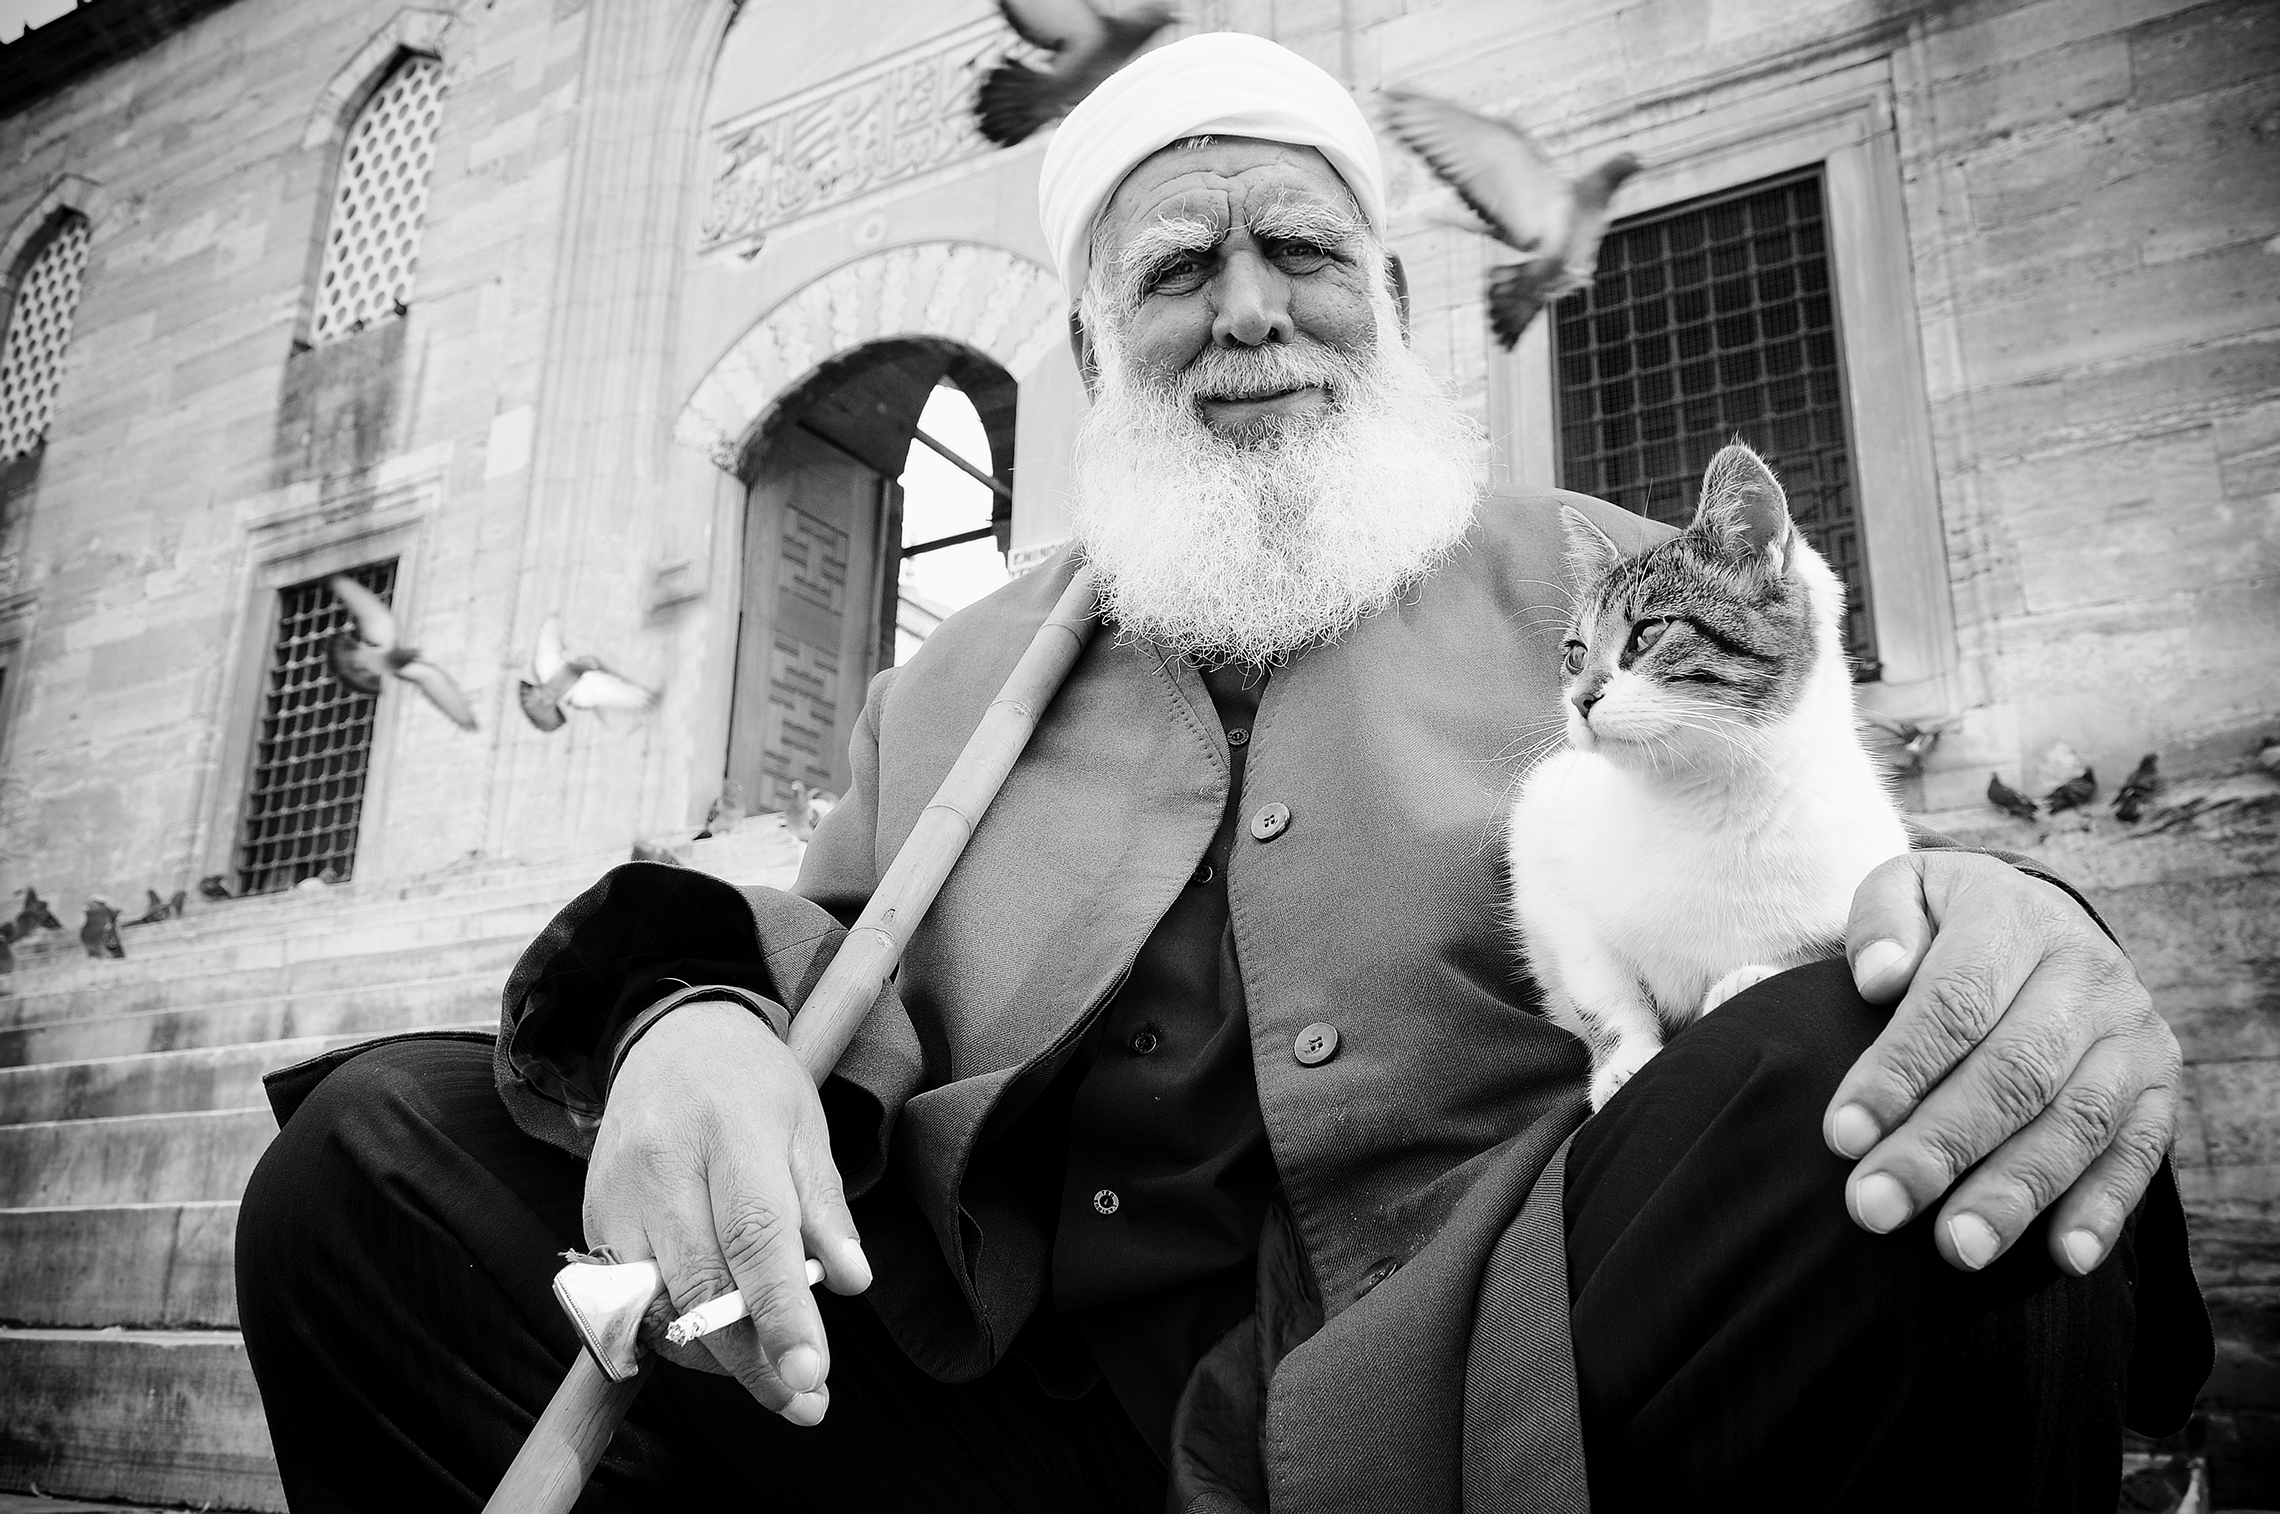 Istanbul, the Old Man & the Cat